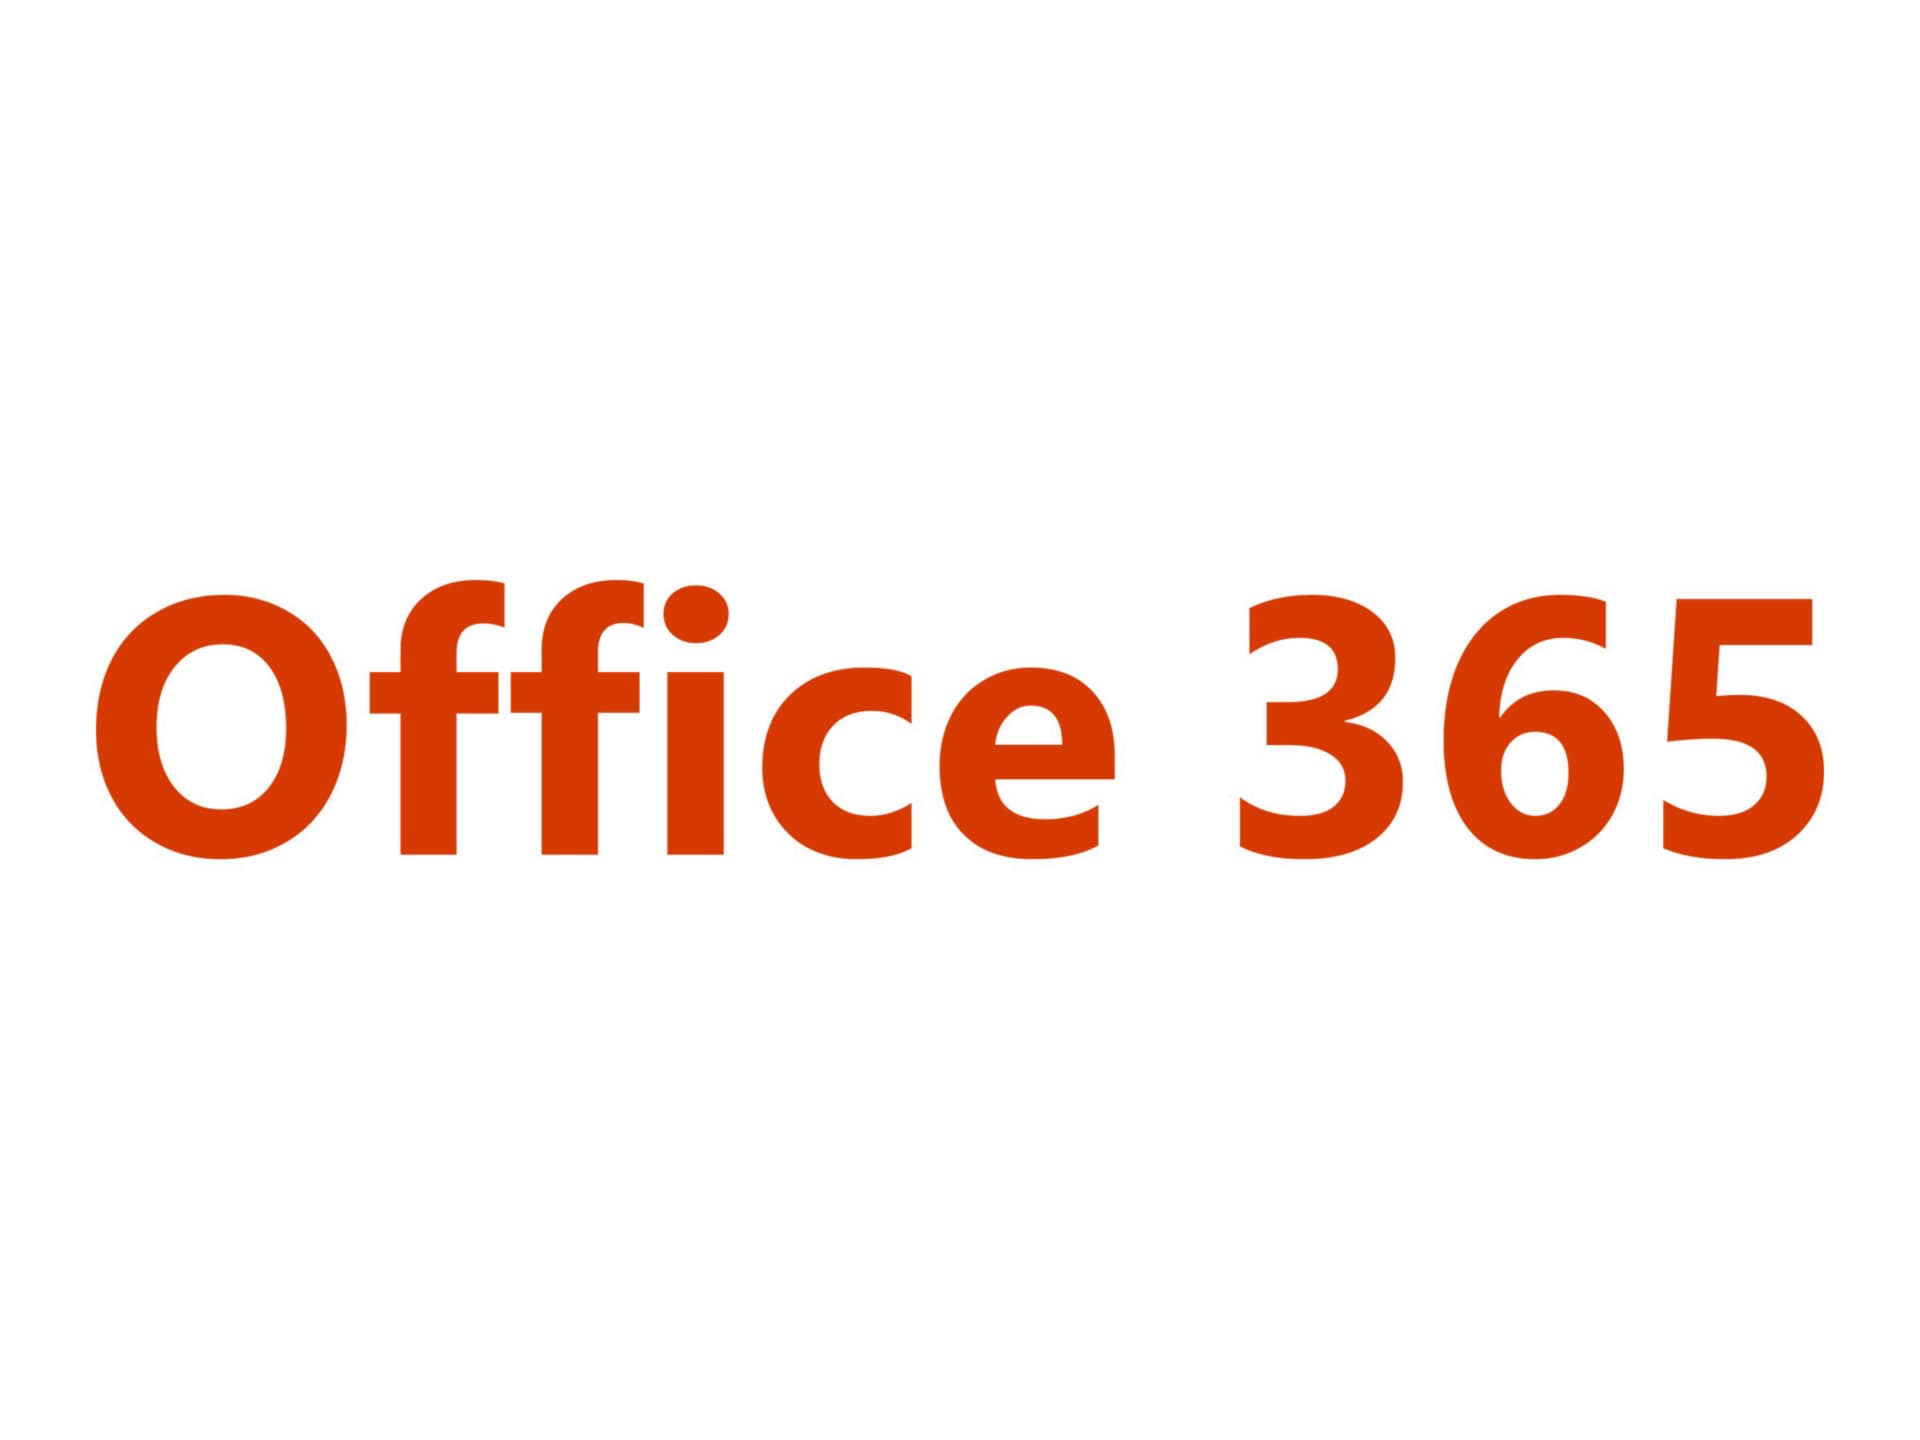 Microsoft Office 365 Advanced Threat Protection - subscription license - 1 user